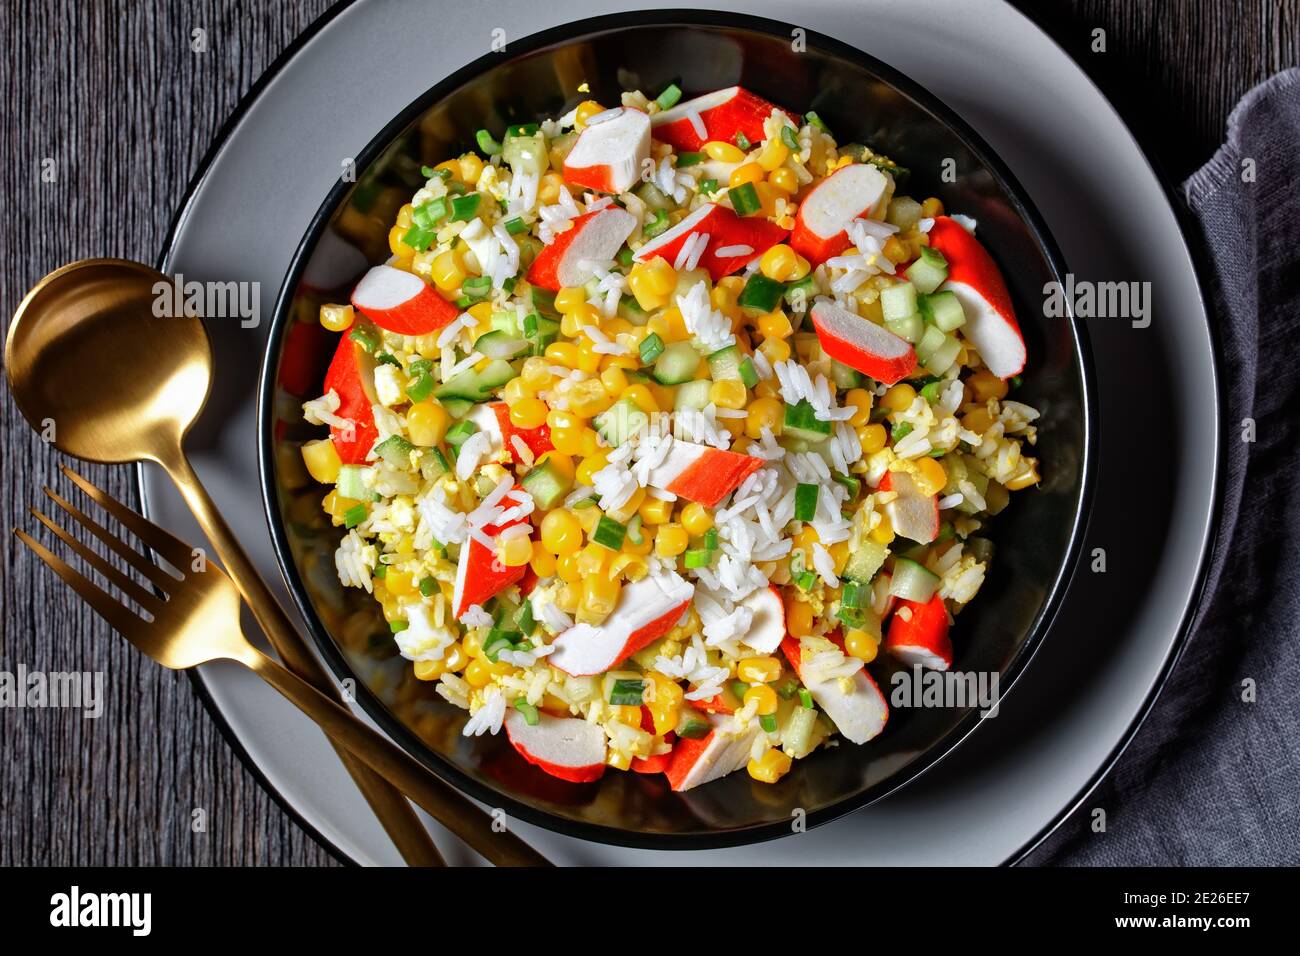 Crab salad of surimi sticks with vegetables: corn, cucumbers, scallion,  eggs, jasmine rice with lime and mayonnaise dressing served in a black bowl o Stock Photo